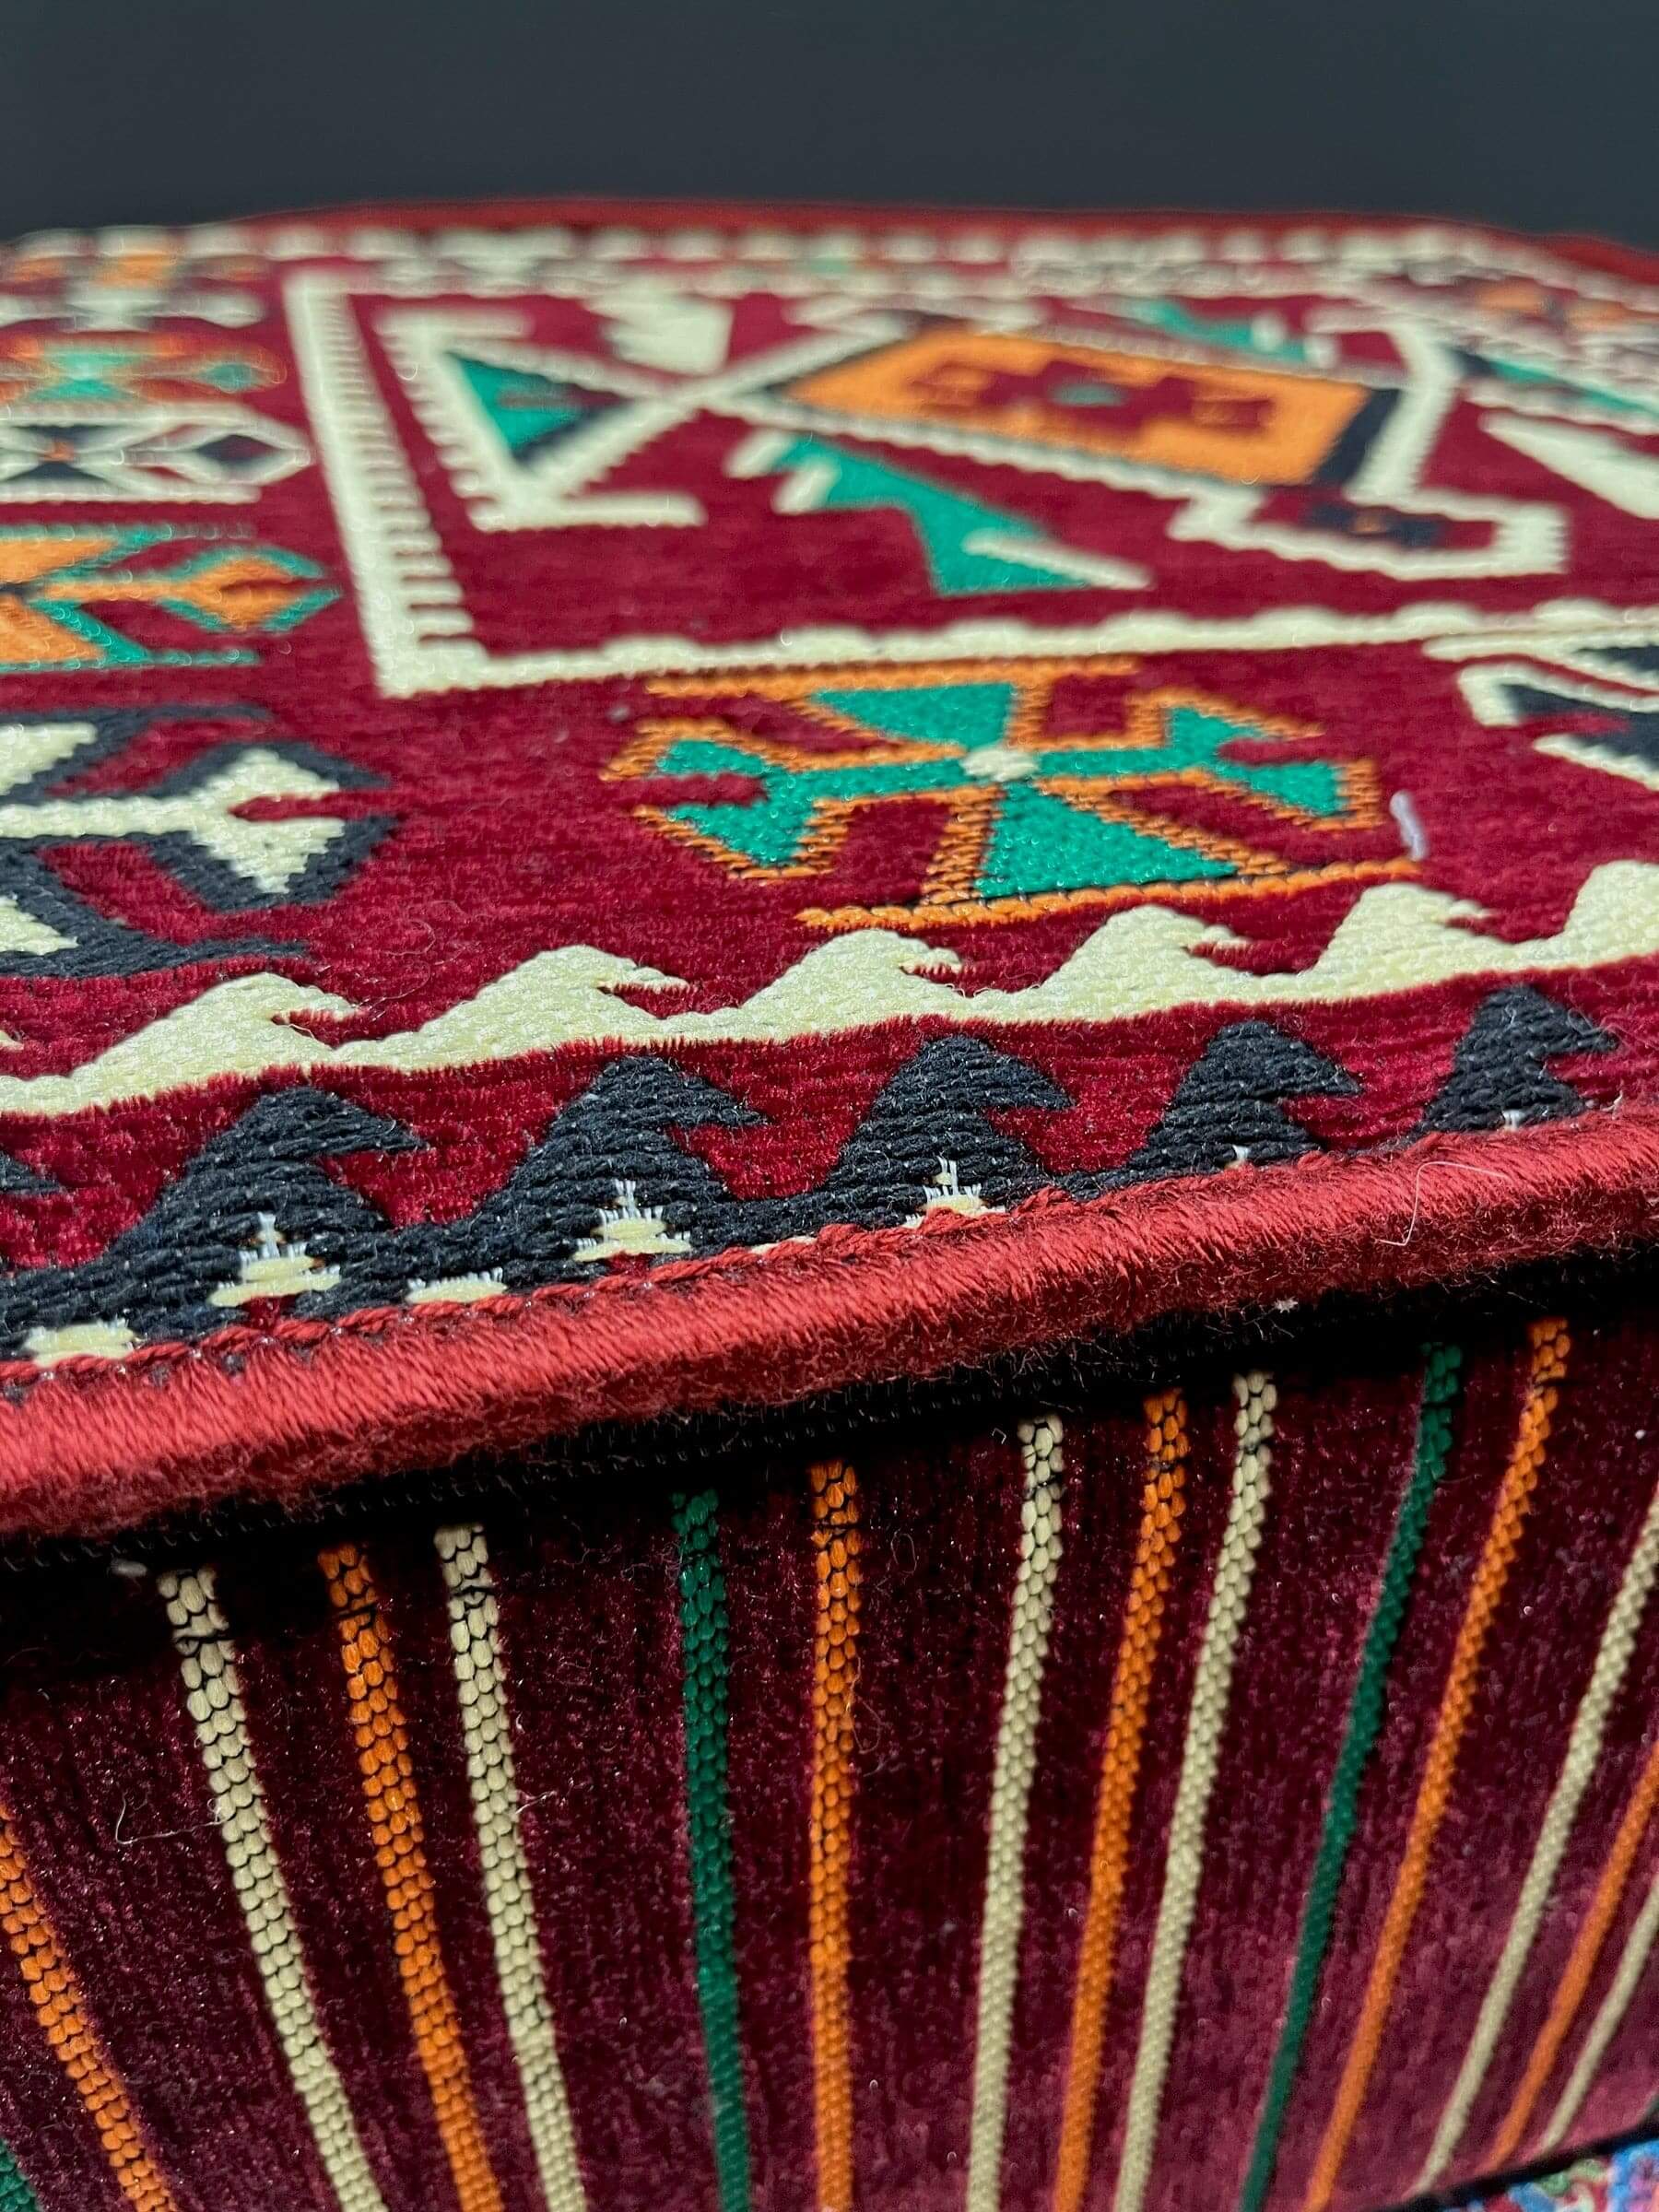 Cushion Table (Maroon with green & orange)This 60x60 cushion table will bring an elegant, luxurious look to your home. Crafted from Turkish fabrics with a solid sponge interior, this table is stylish and built to last. It's beautiful designs and tradition